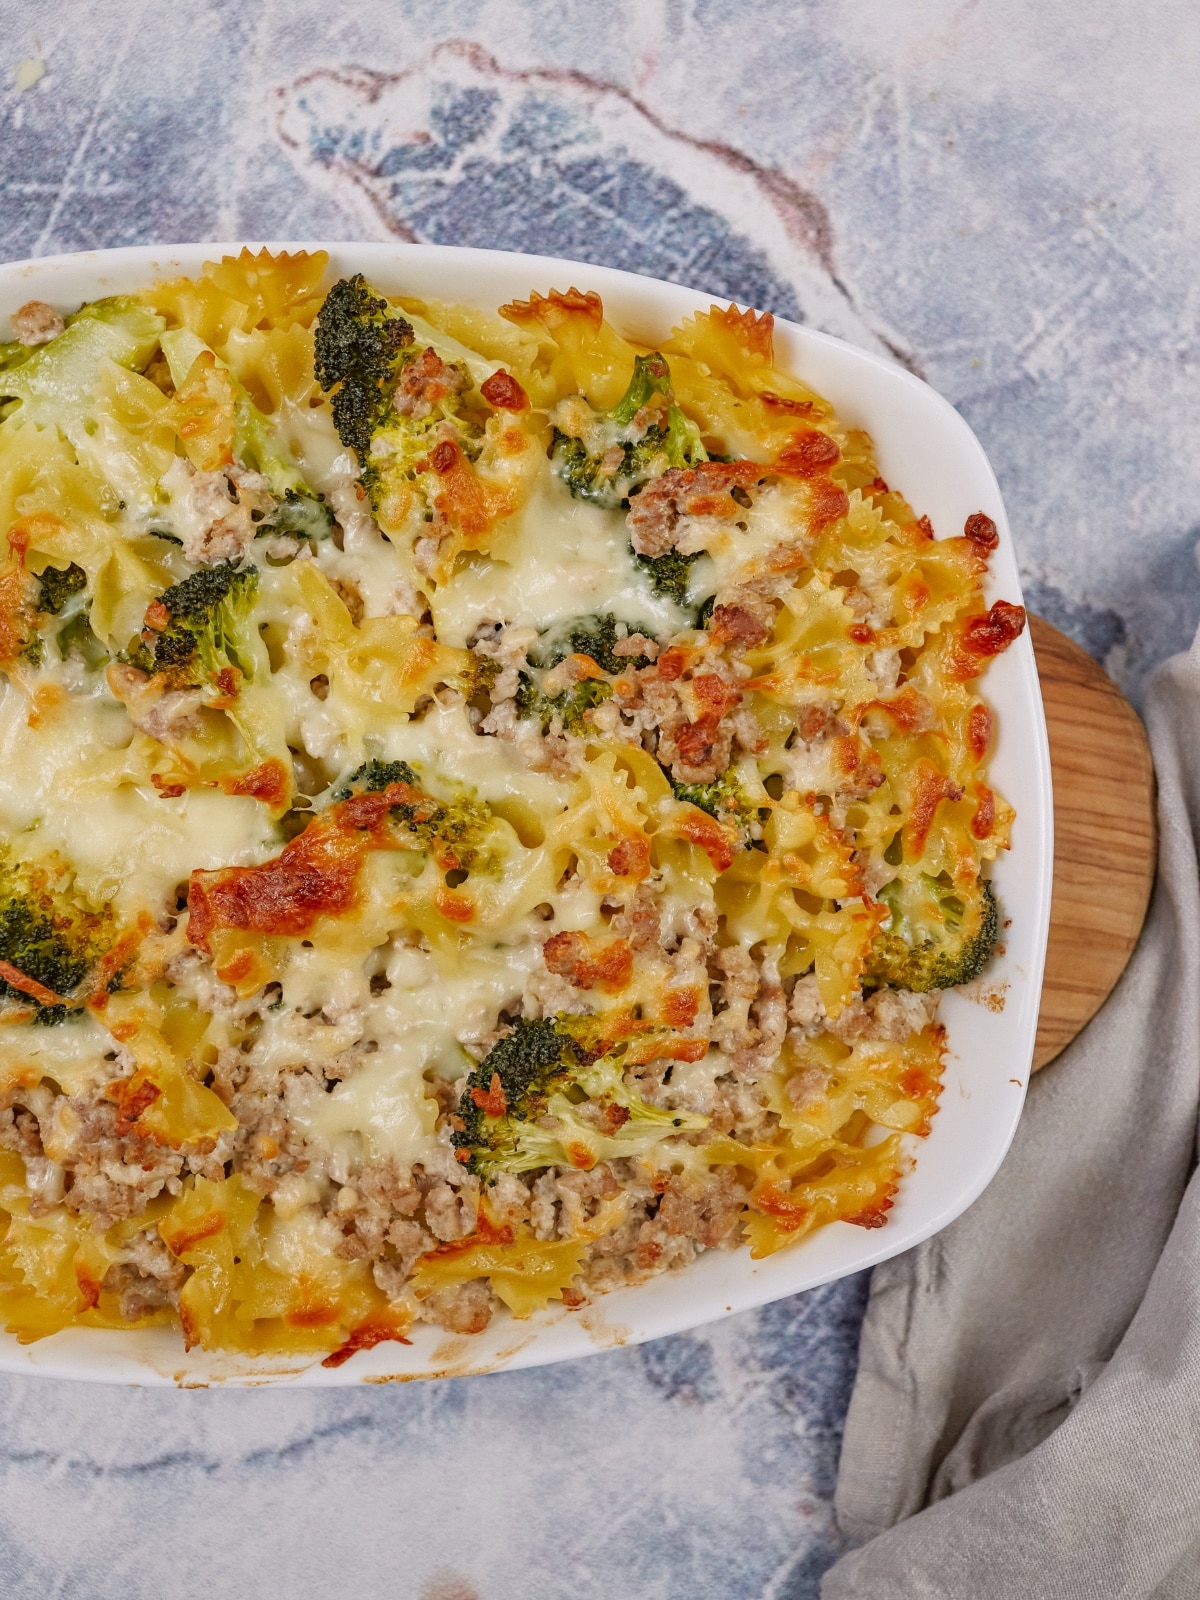 turkey and pasta casserole in a baking dish